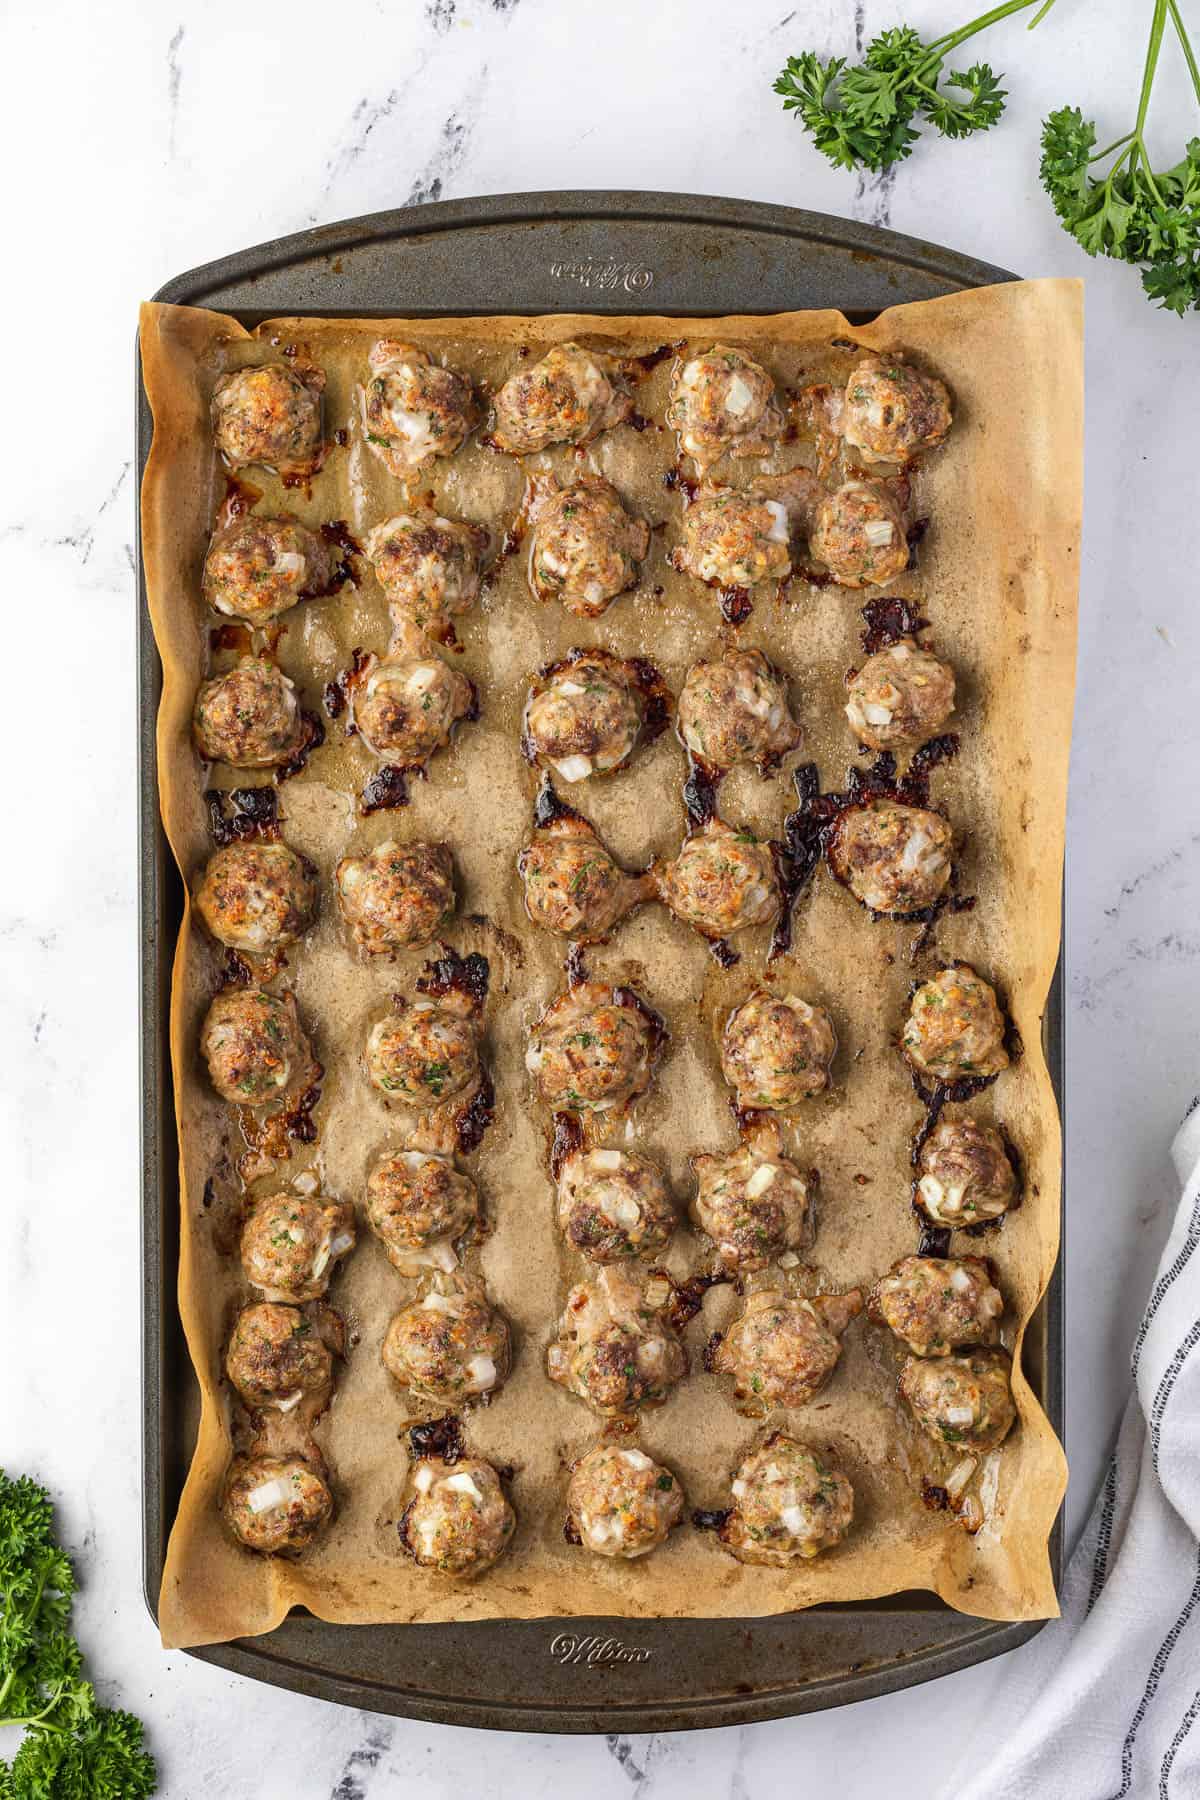 baking sheet full of cooked meatballs.